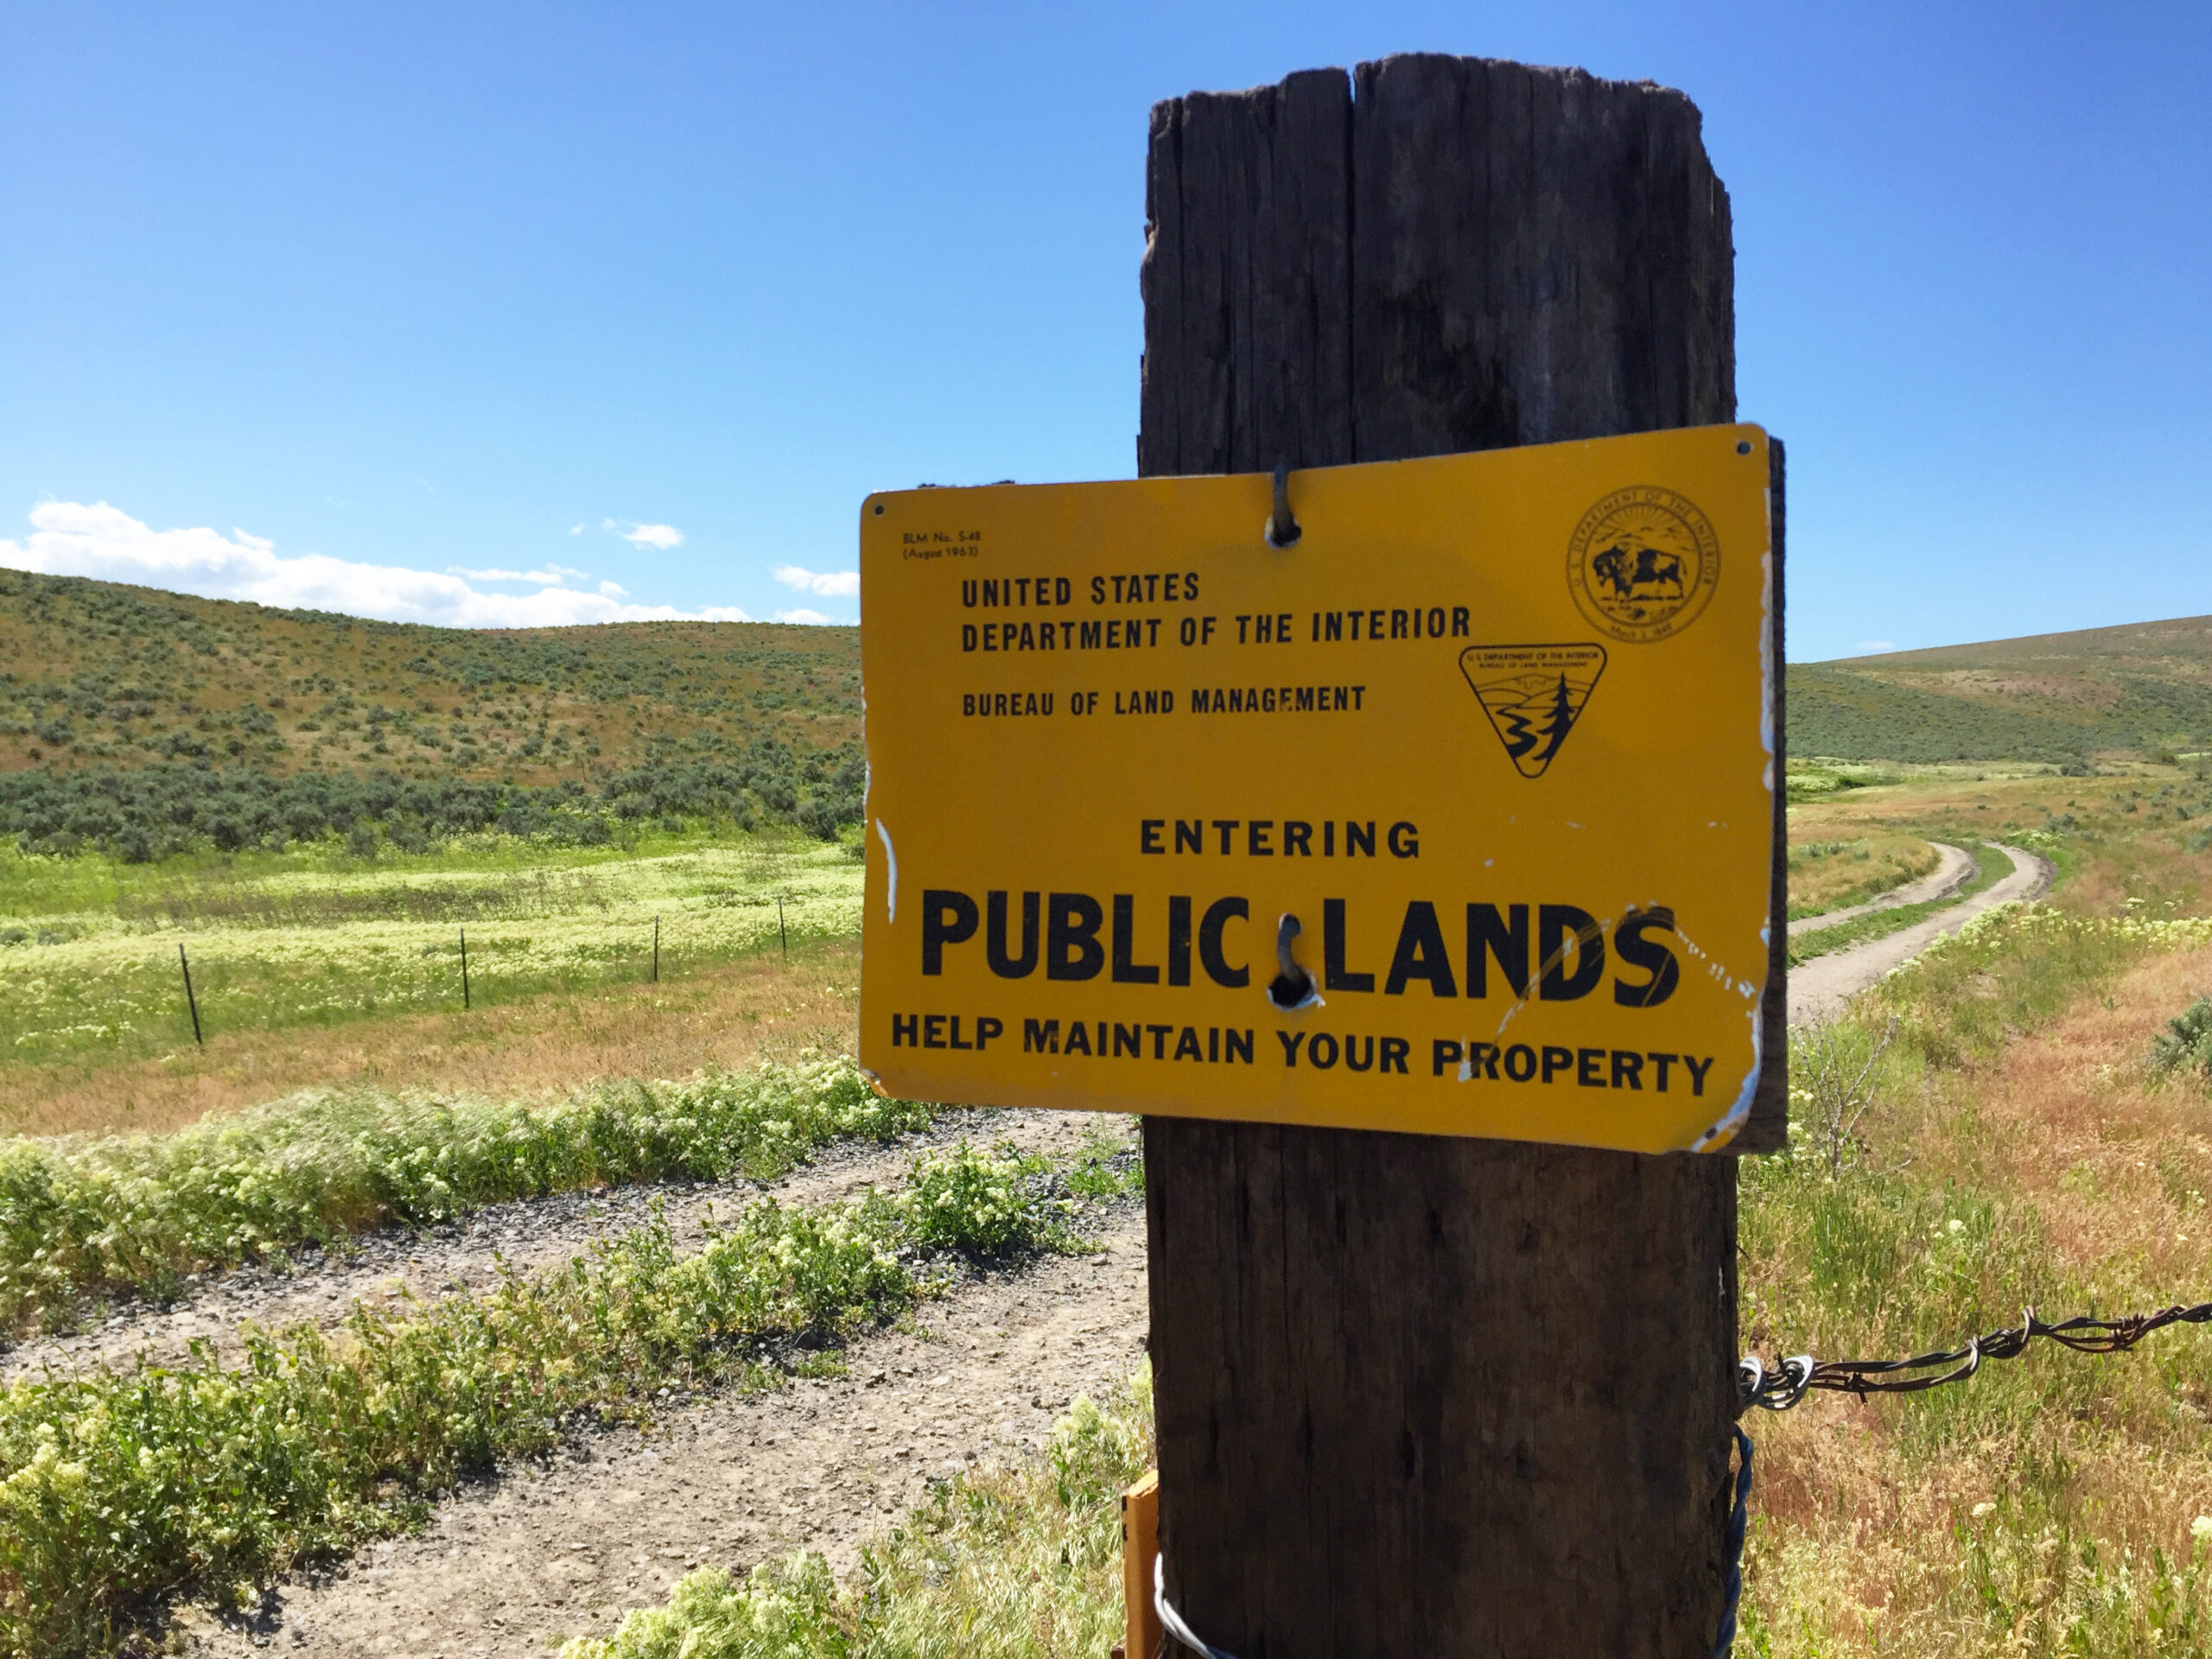 A yellow sign that reads "Entering Public Lands" on a weathered fence post in front of a two-track road